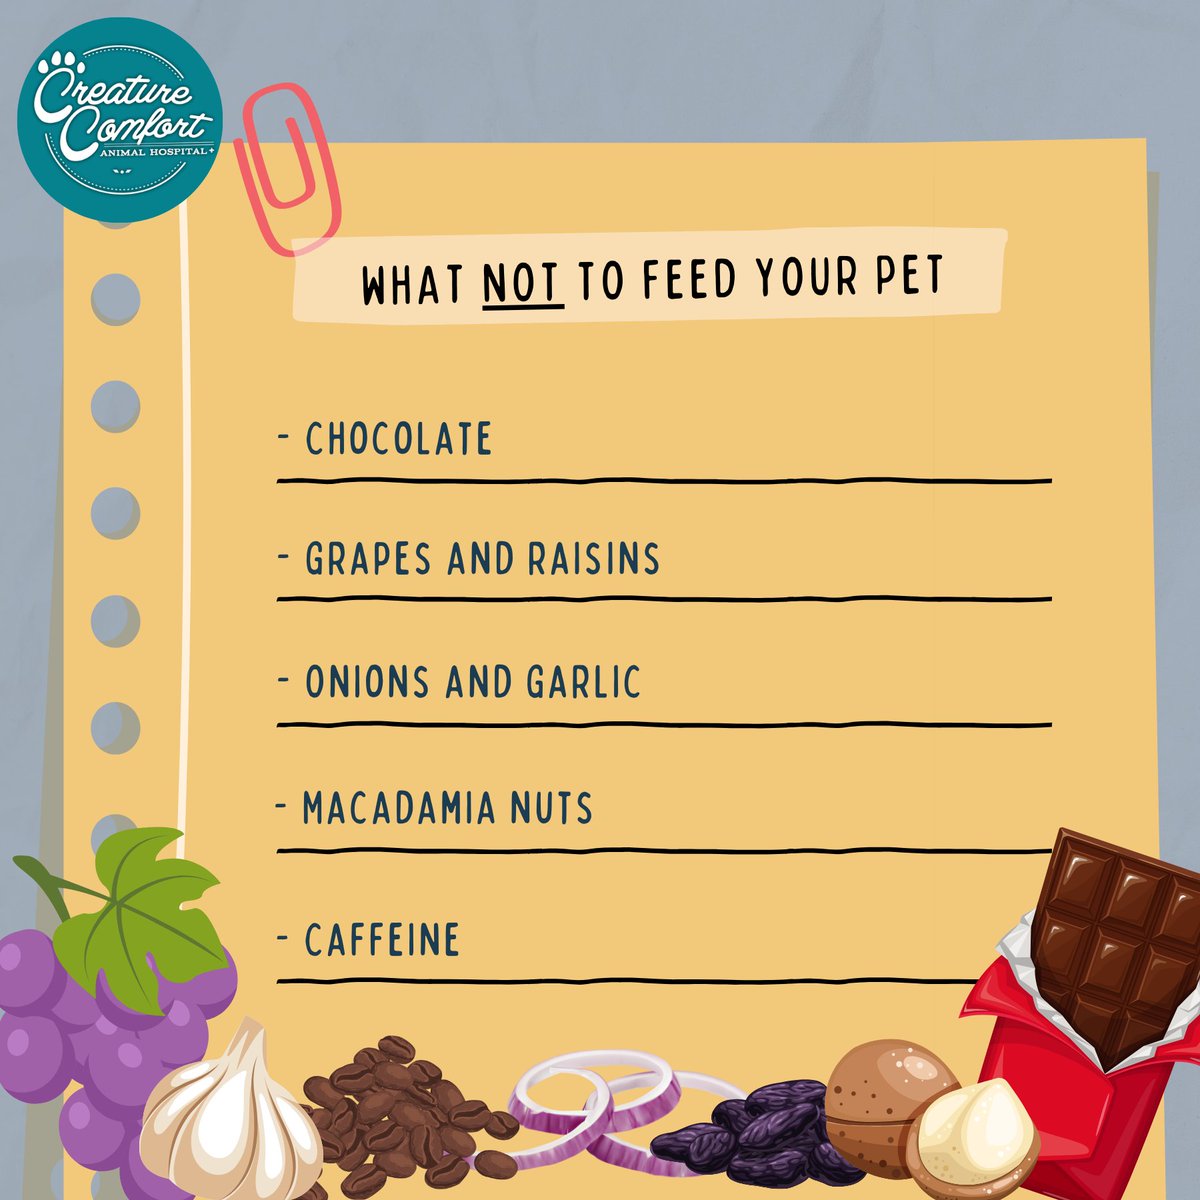 Let's talk about what NOT to feed your pets! Protect your furry friends by avoiding these toxic treats. Share to spread awareness! 🐾❌ #PetSafety #PoisonPrevention #PetWellness